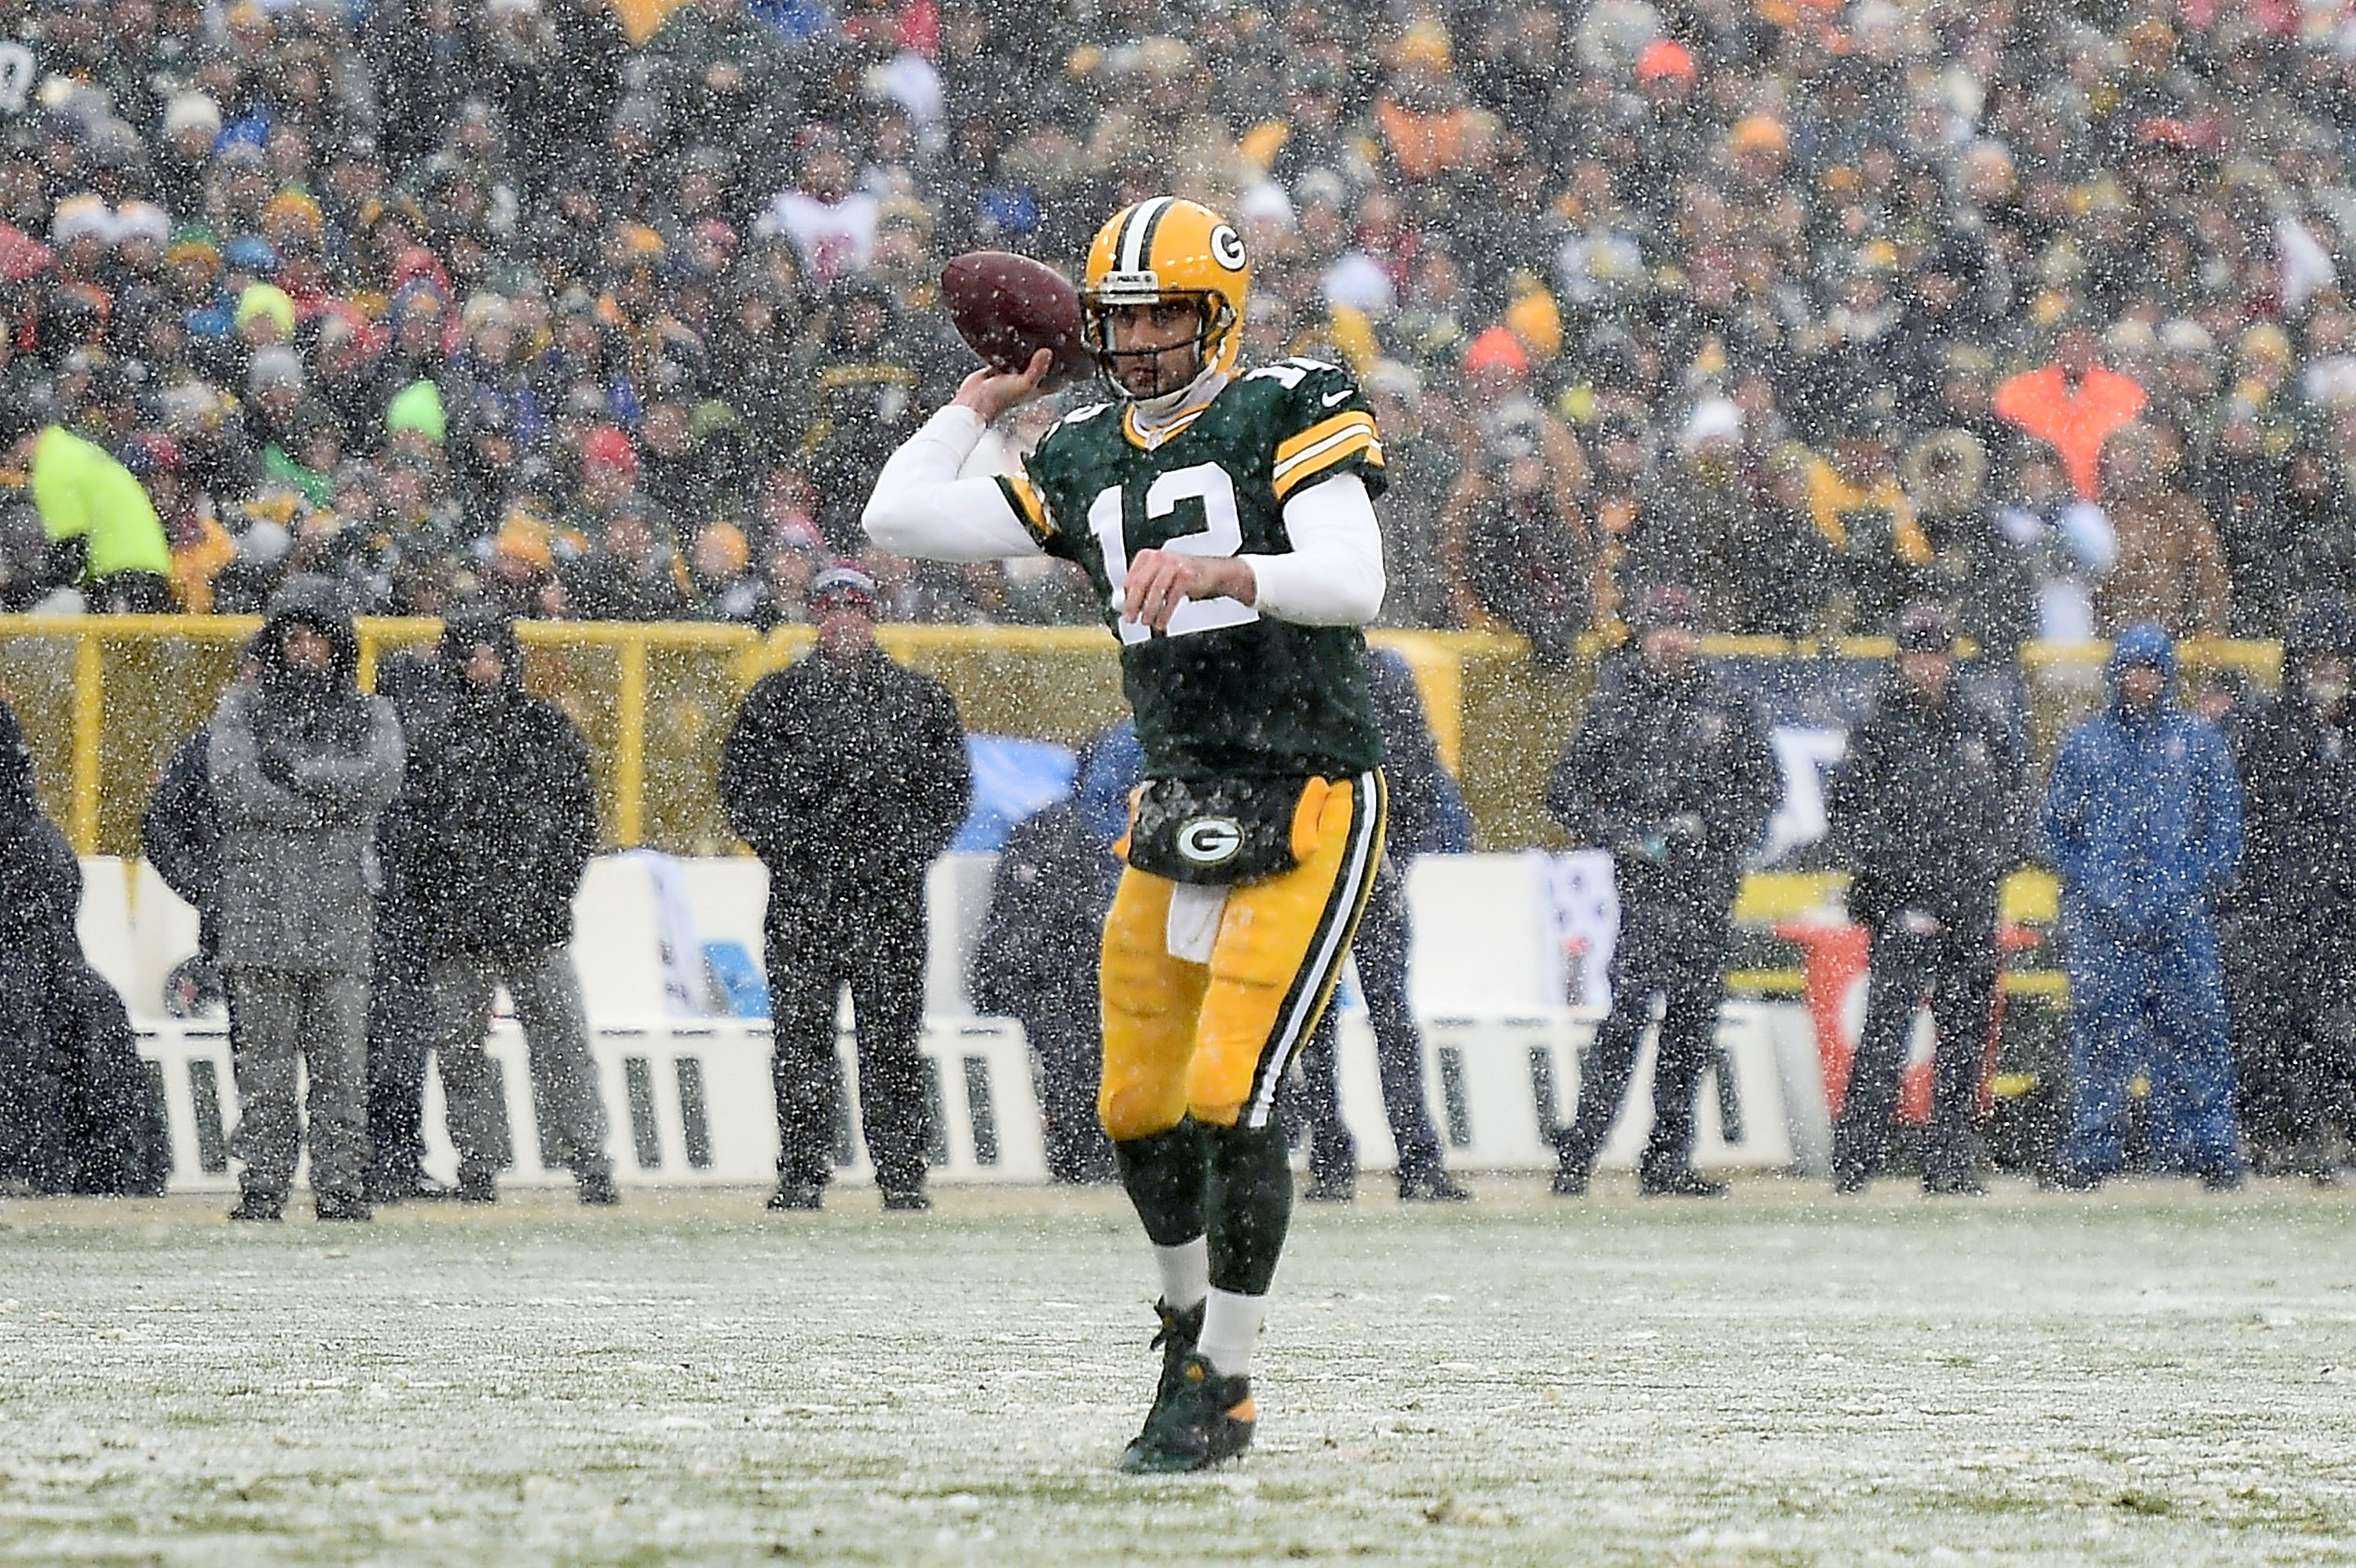 Aaron Rodgers expected to play in Green Bay, said Packers GM Brian Gutekunst.